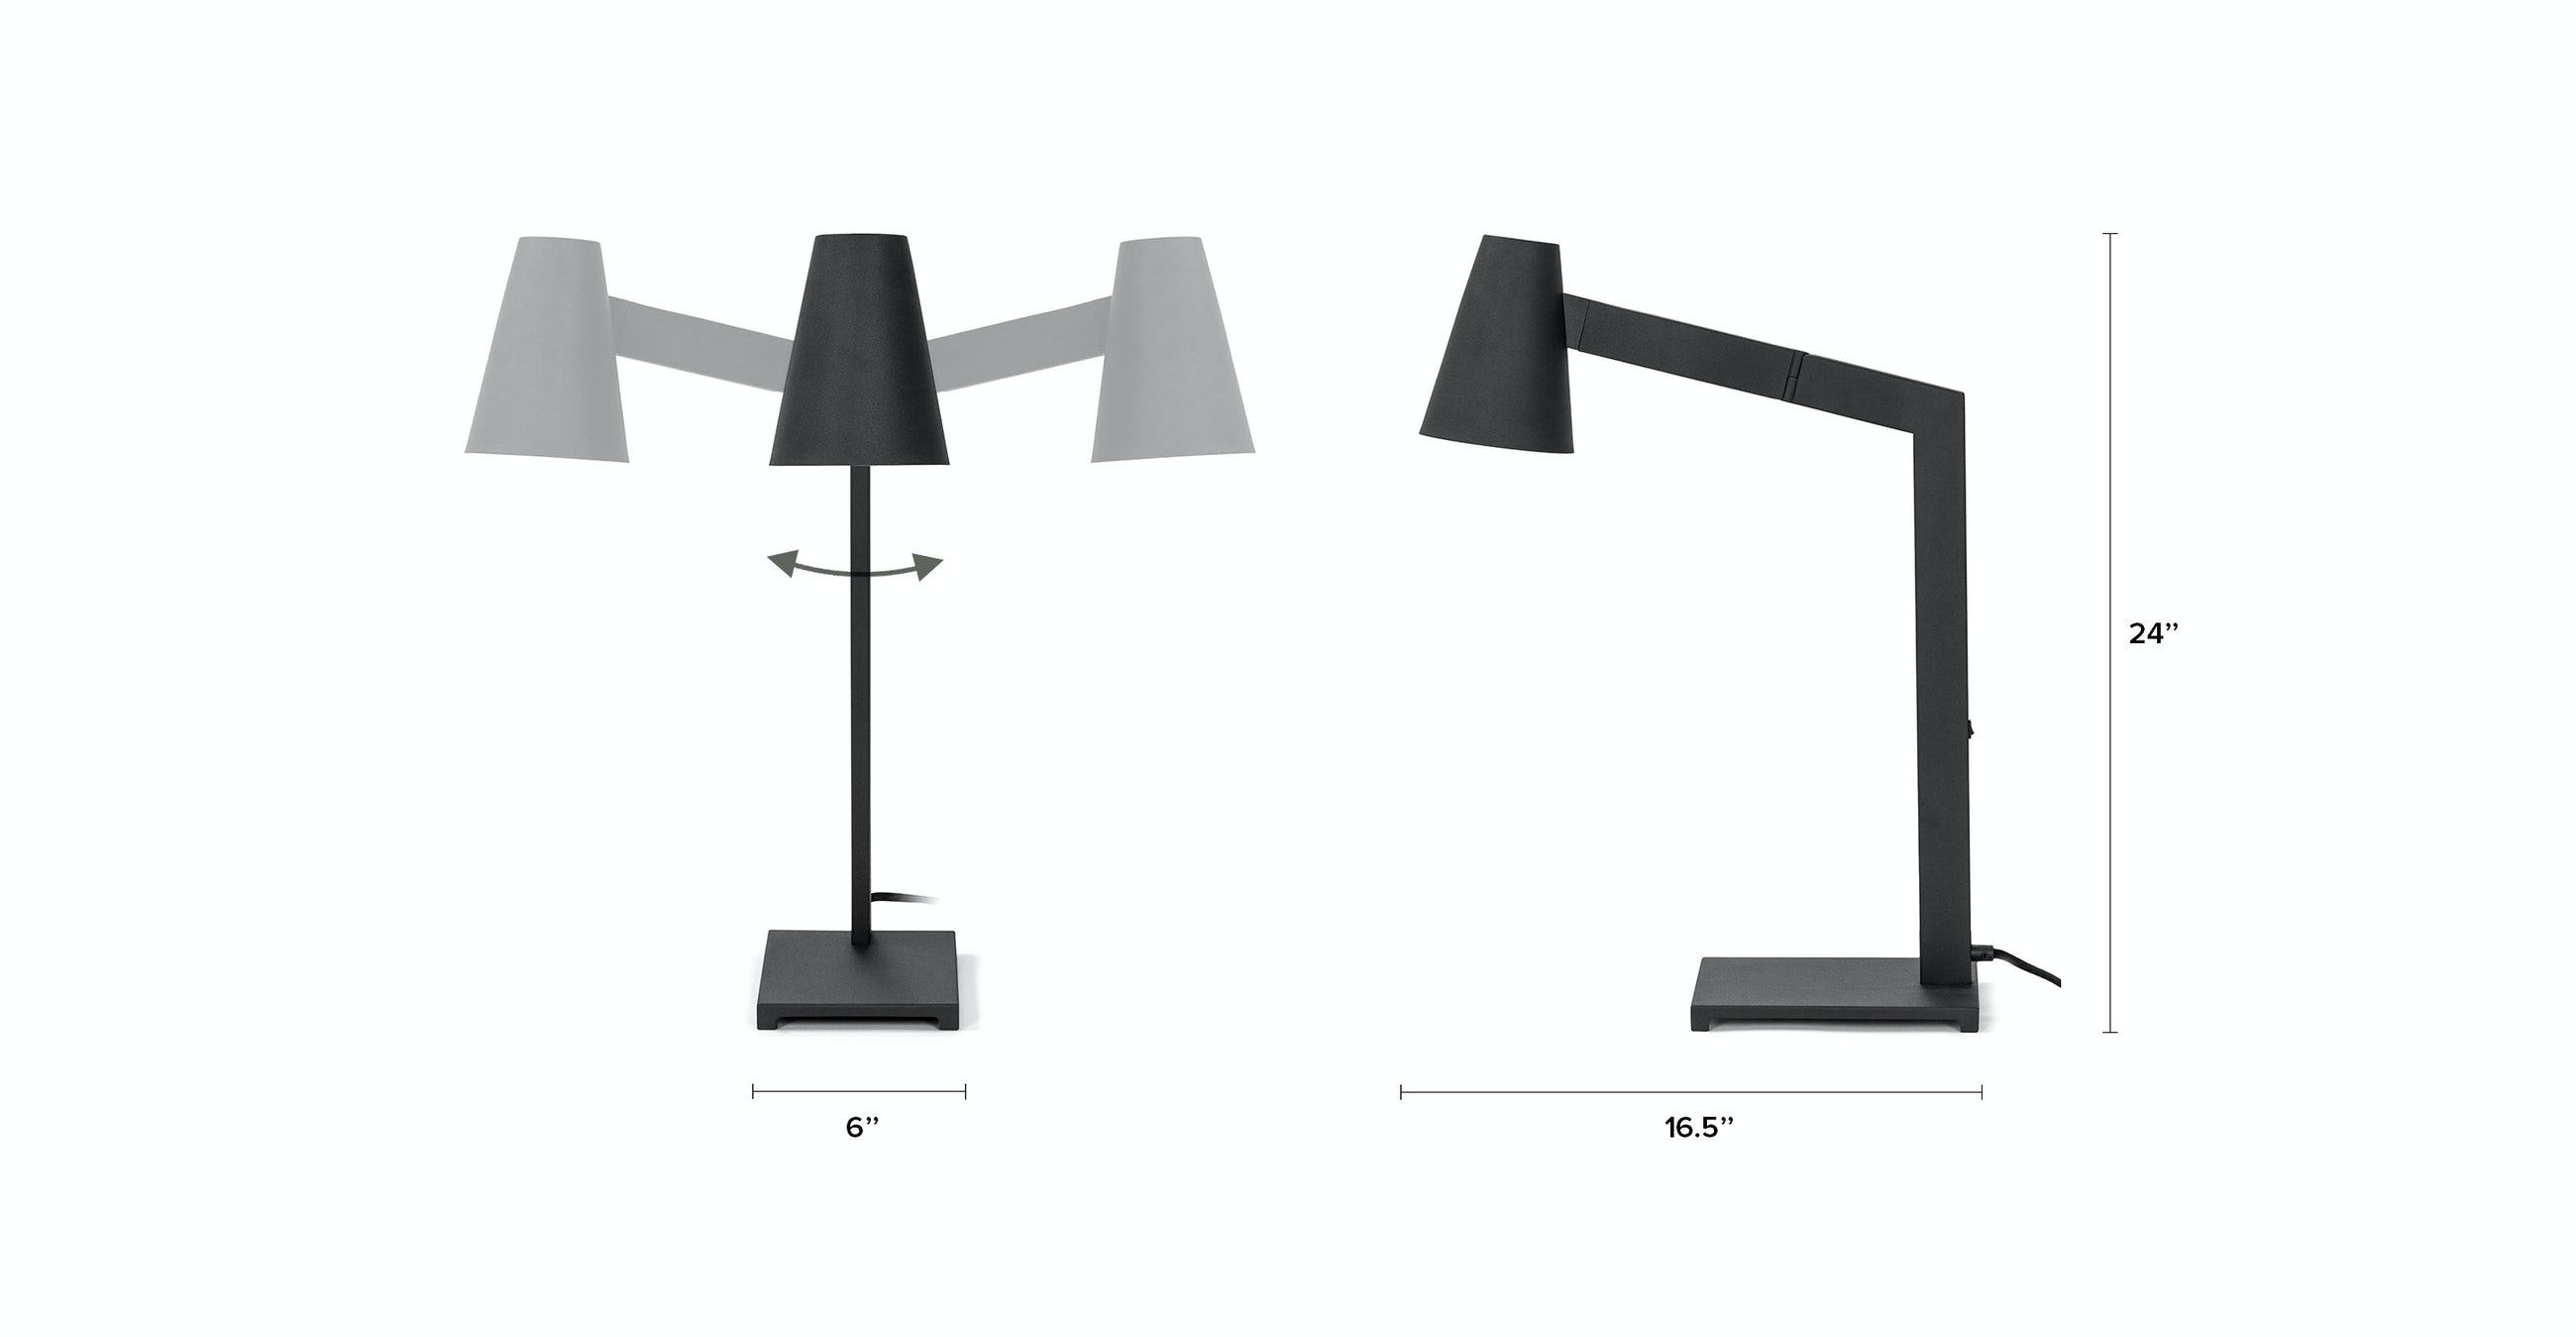 Axis Black Table Lamp - Image 3